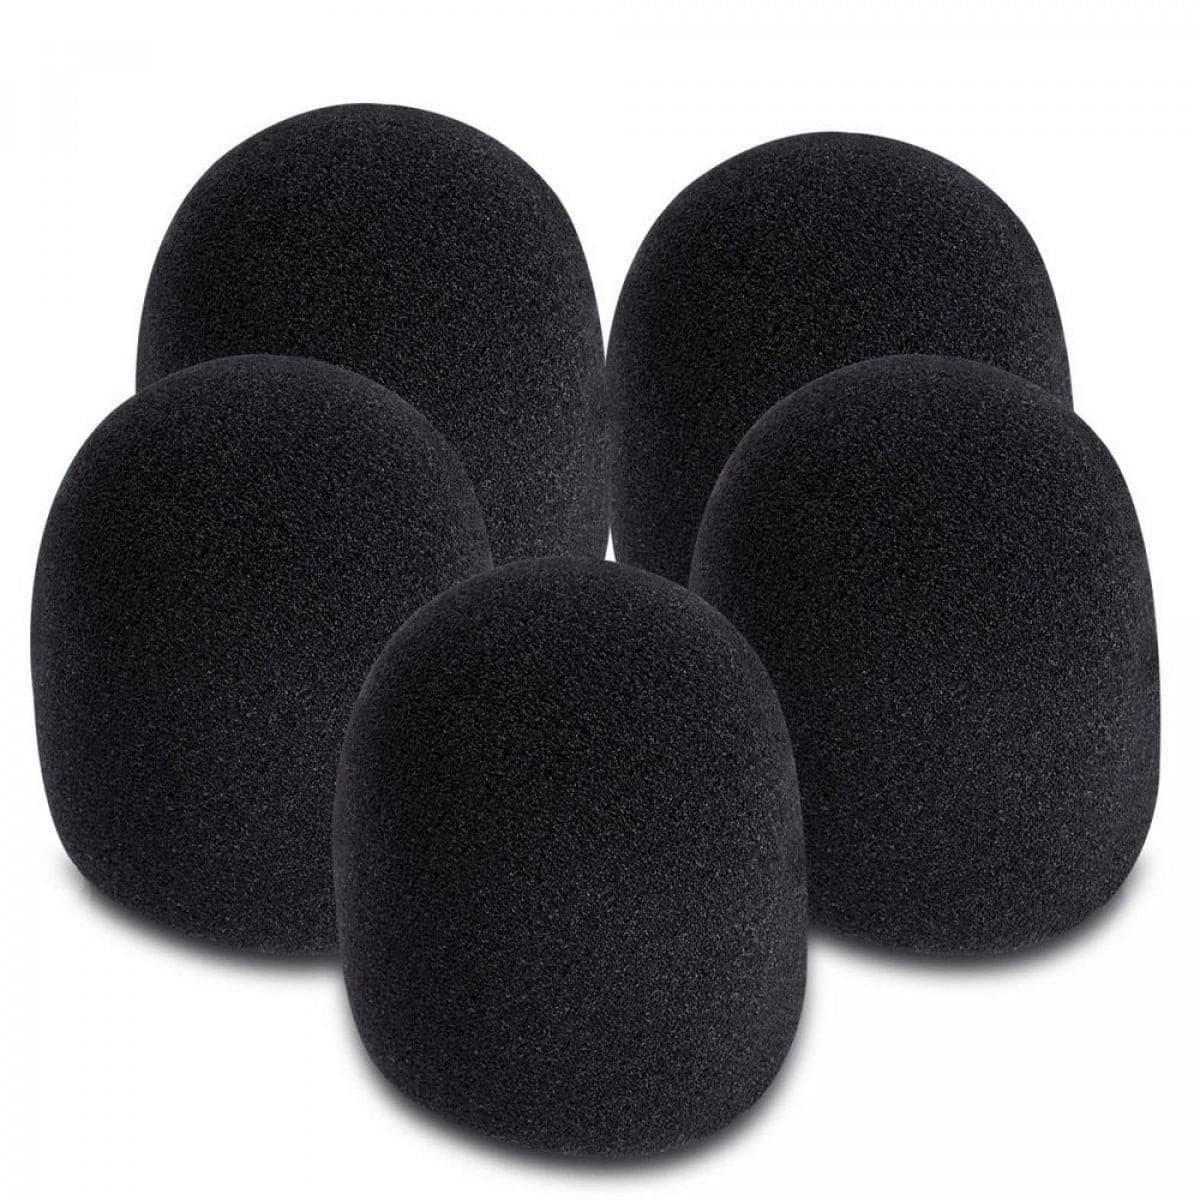 On-Stage Microphone Windscreens - Black 5-Pack,  for sale at Richards Guitars.